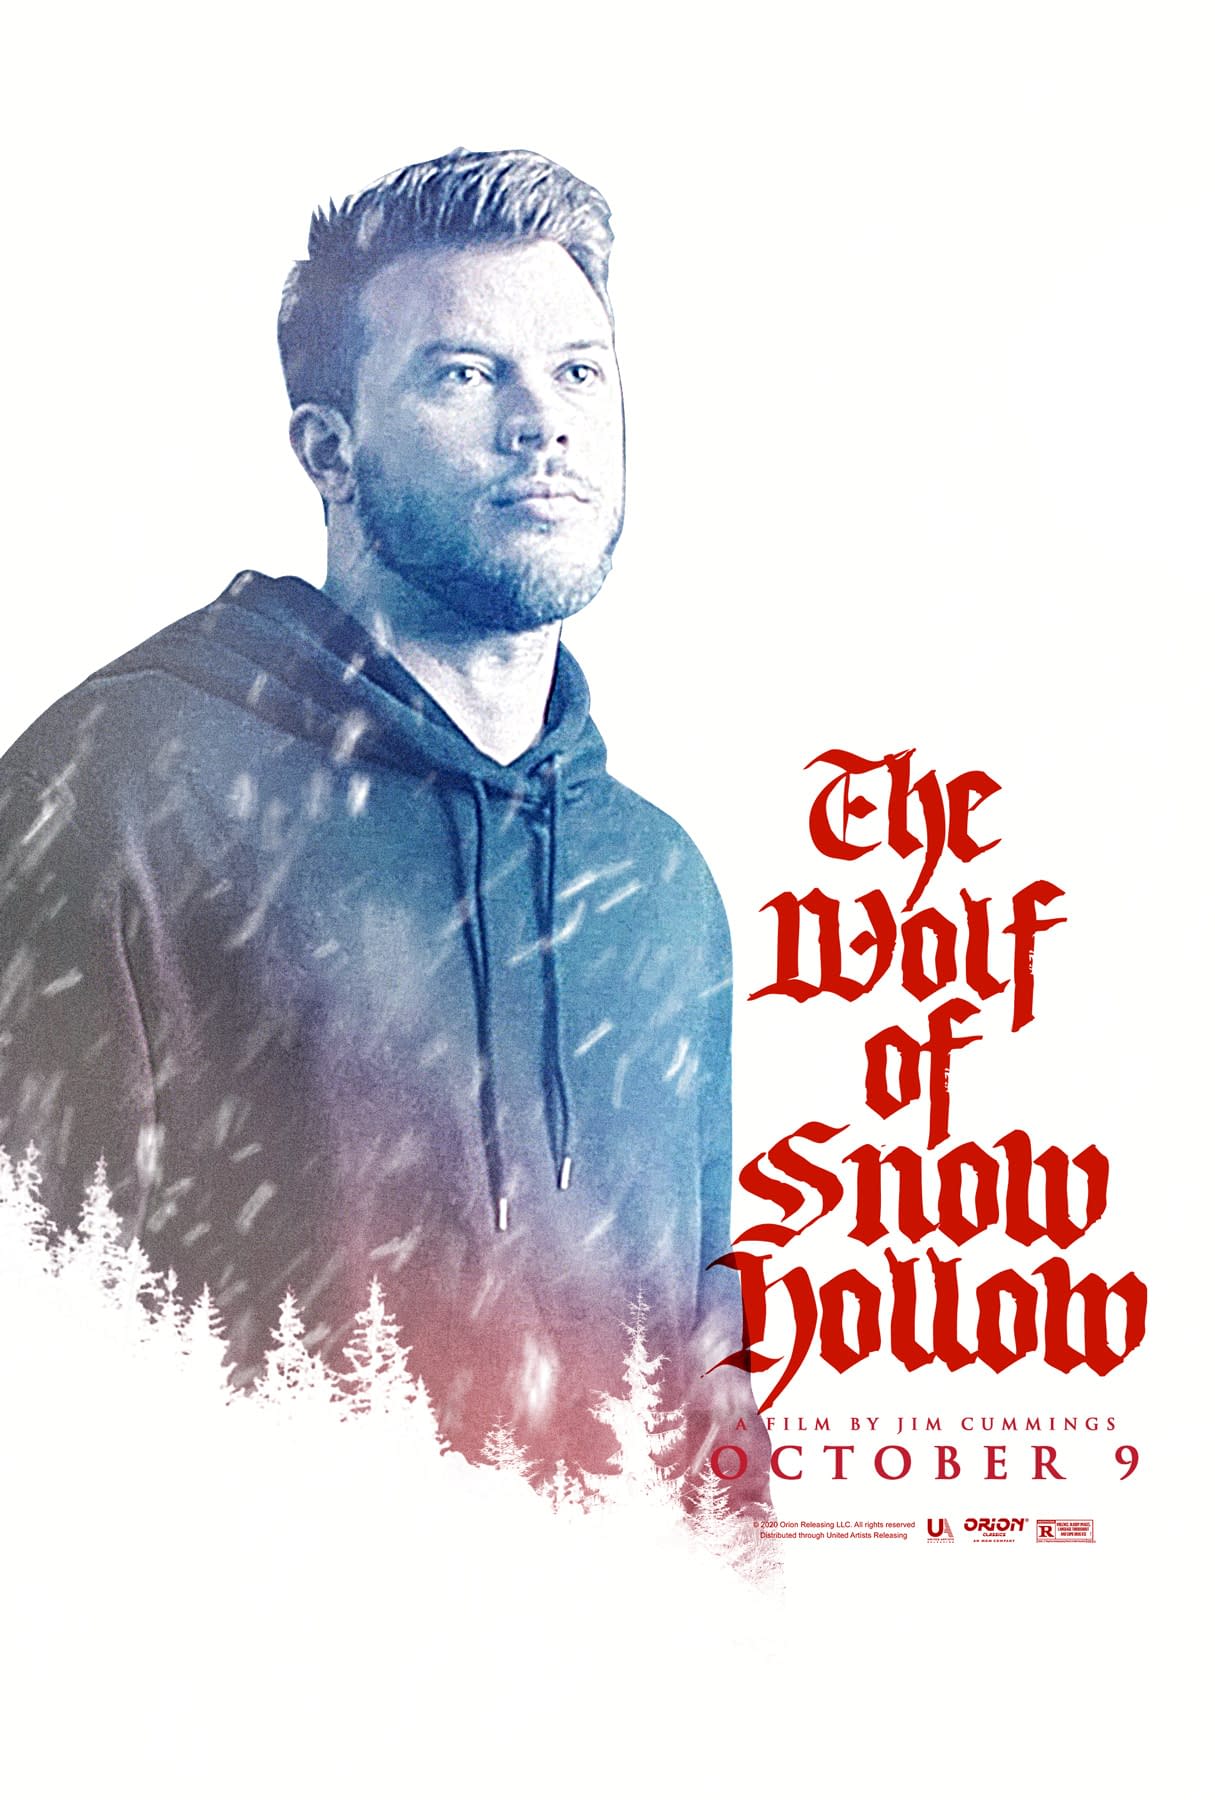 New Clip And Posters From The Wolf Of Snow Hollow Debut